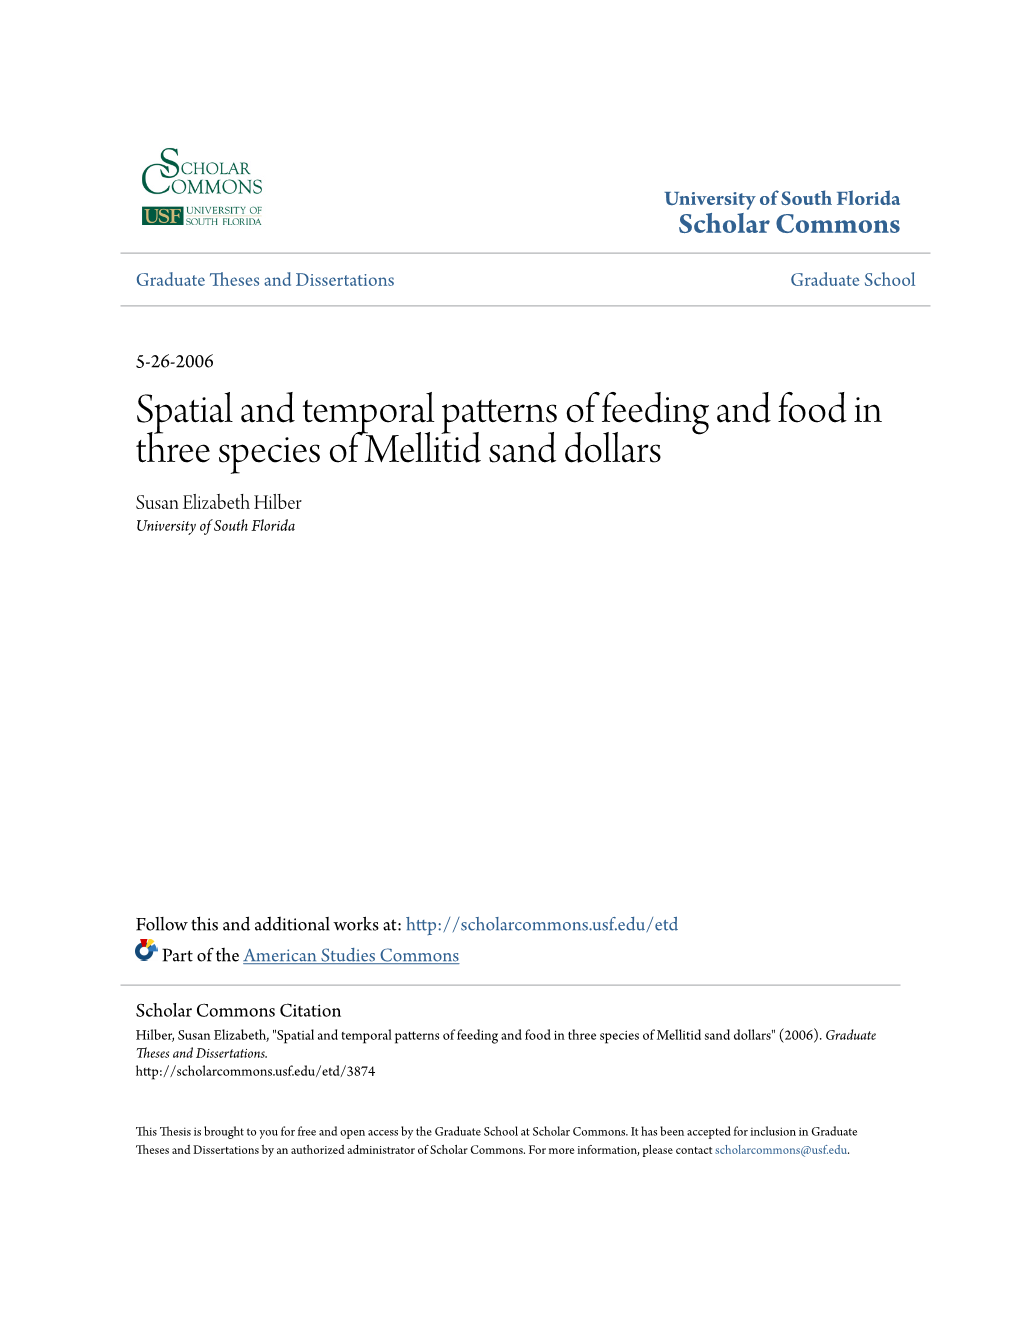 Spatial and Temporal Patterns of Feeding and Food in Three Species of Mellitid Sand Dollars Susan Elizabeth Hilber University of South Florida